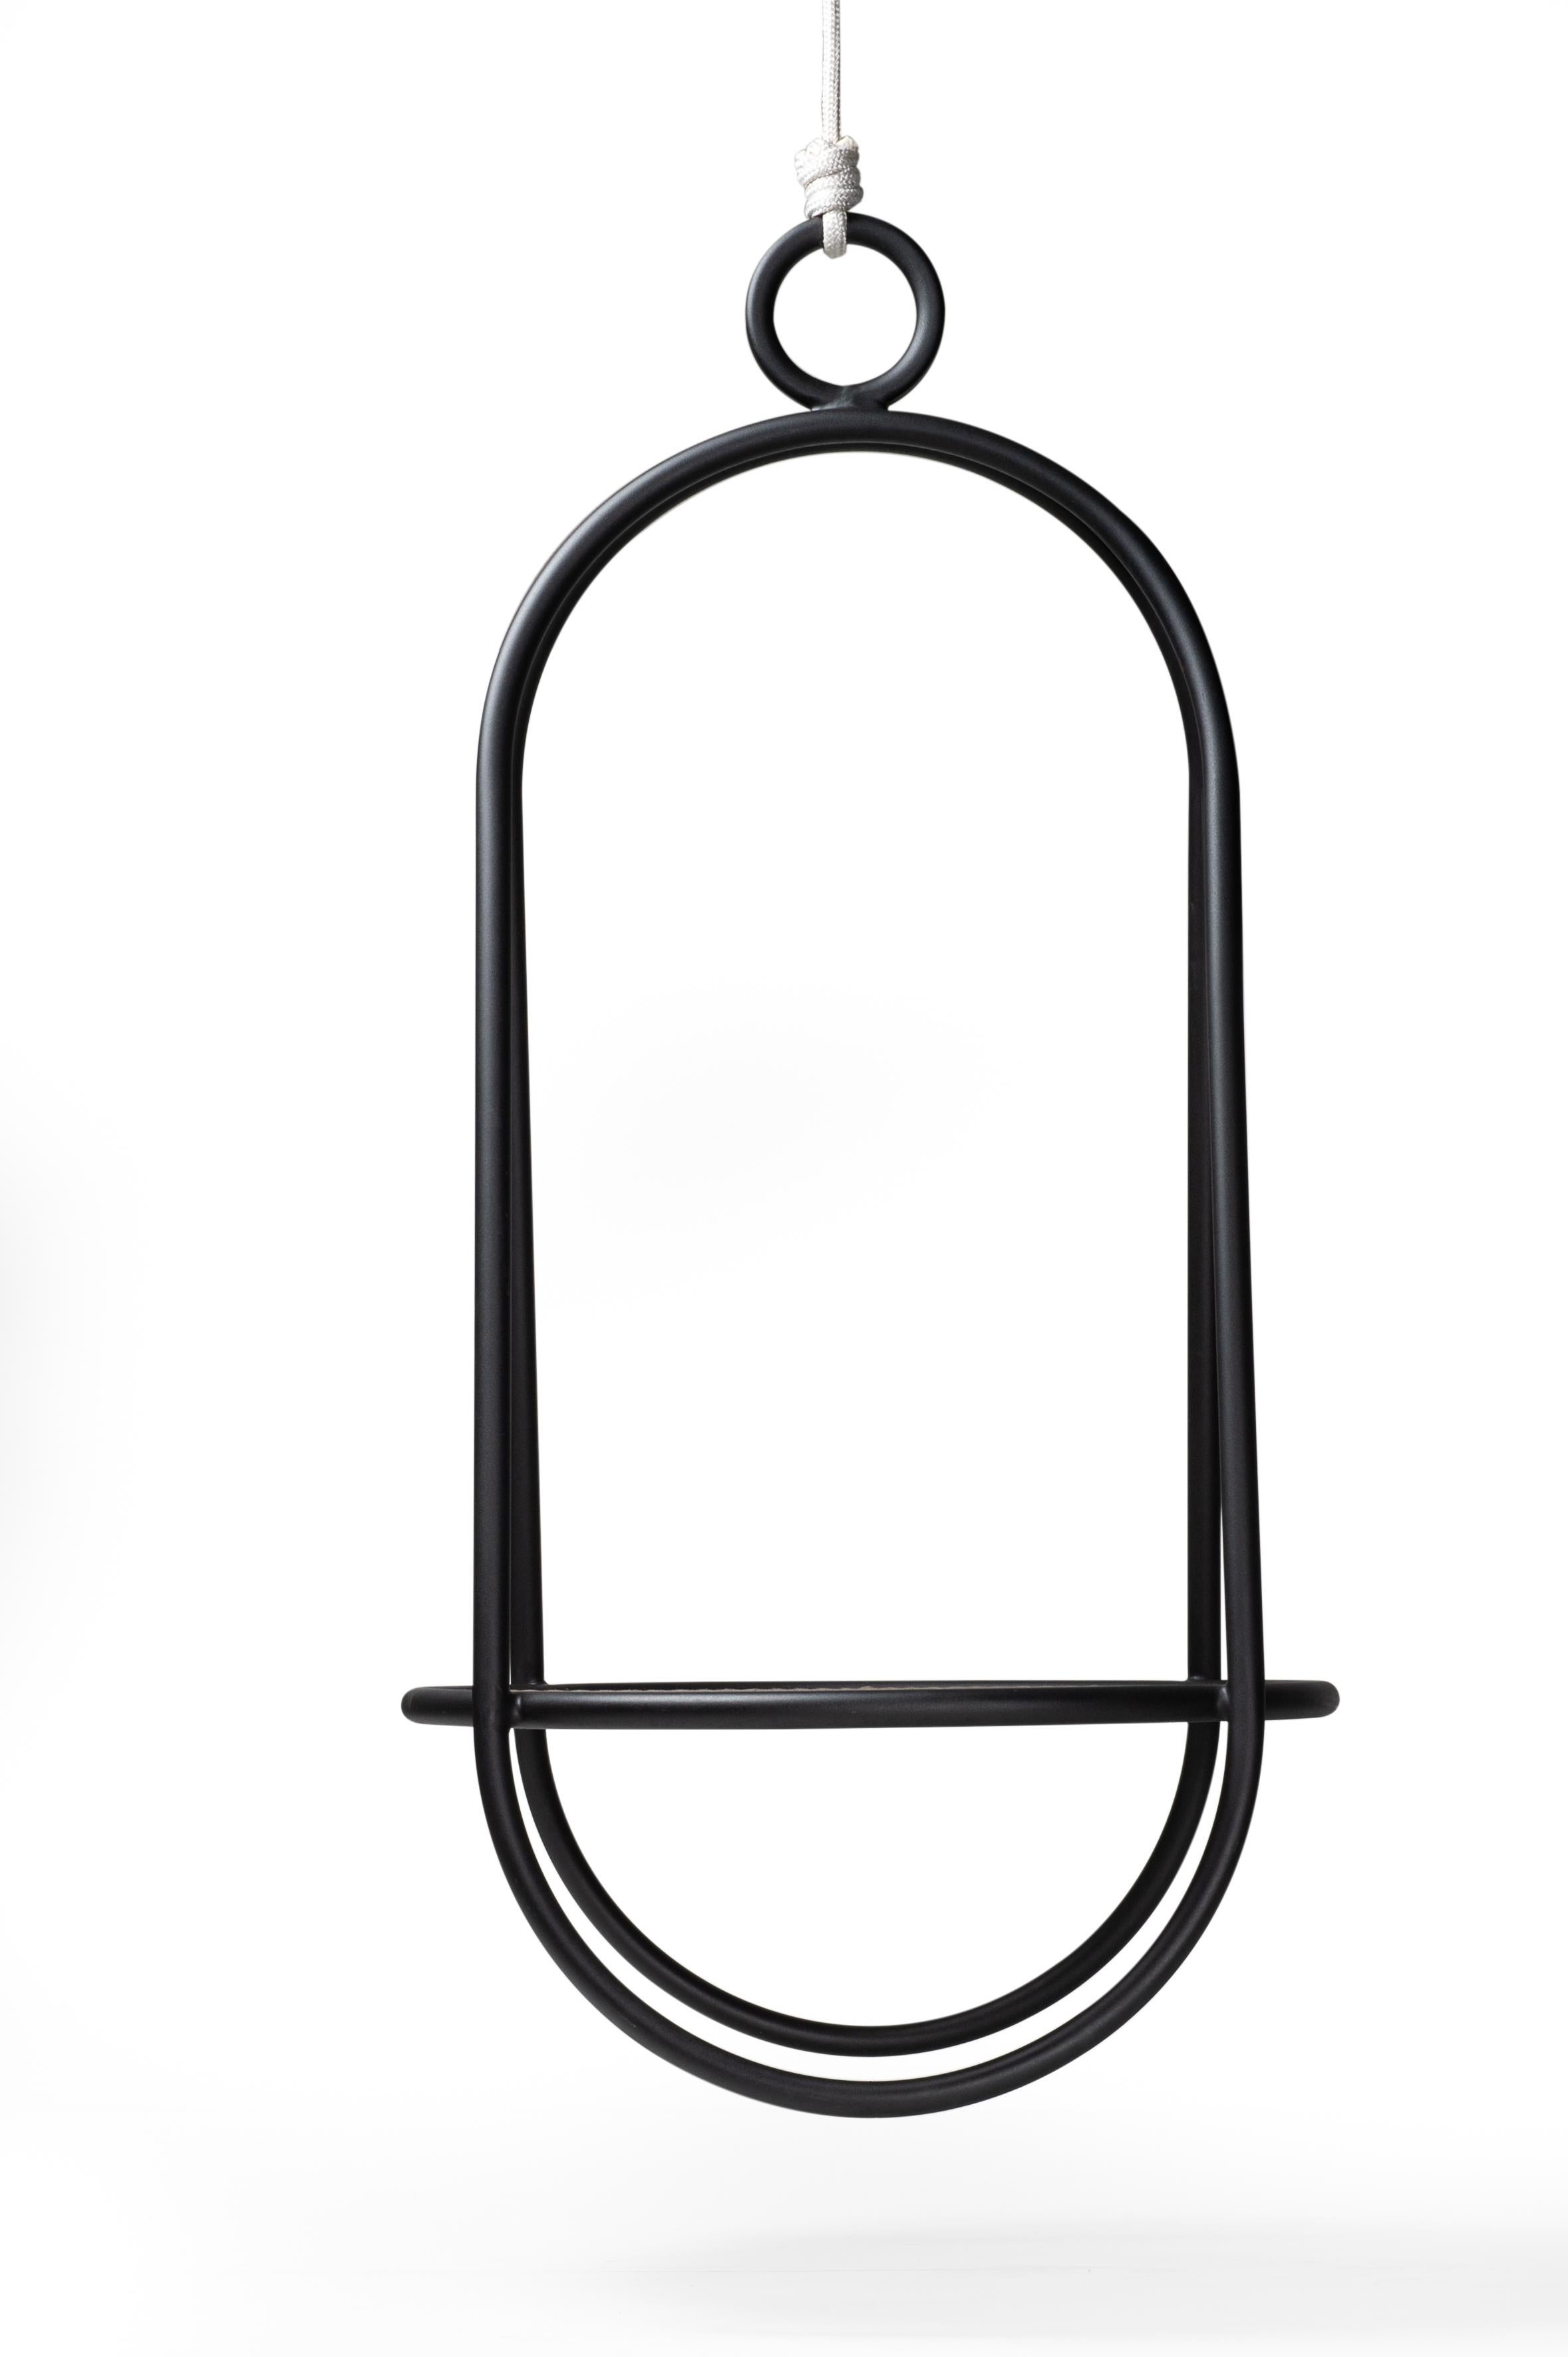 South American OCA, Minimalist Hanging Swing Chair by Tiago Curioni in Aluminium For Sale